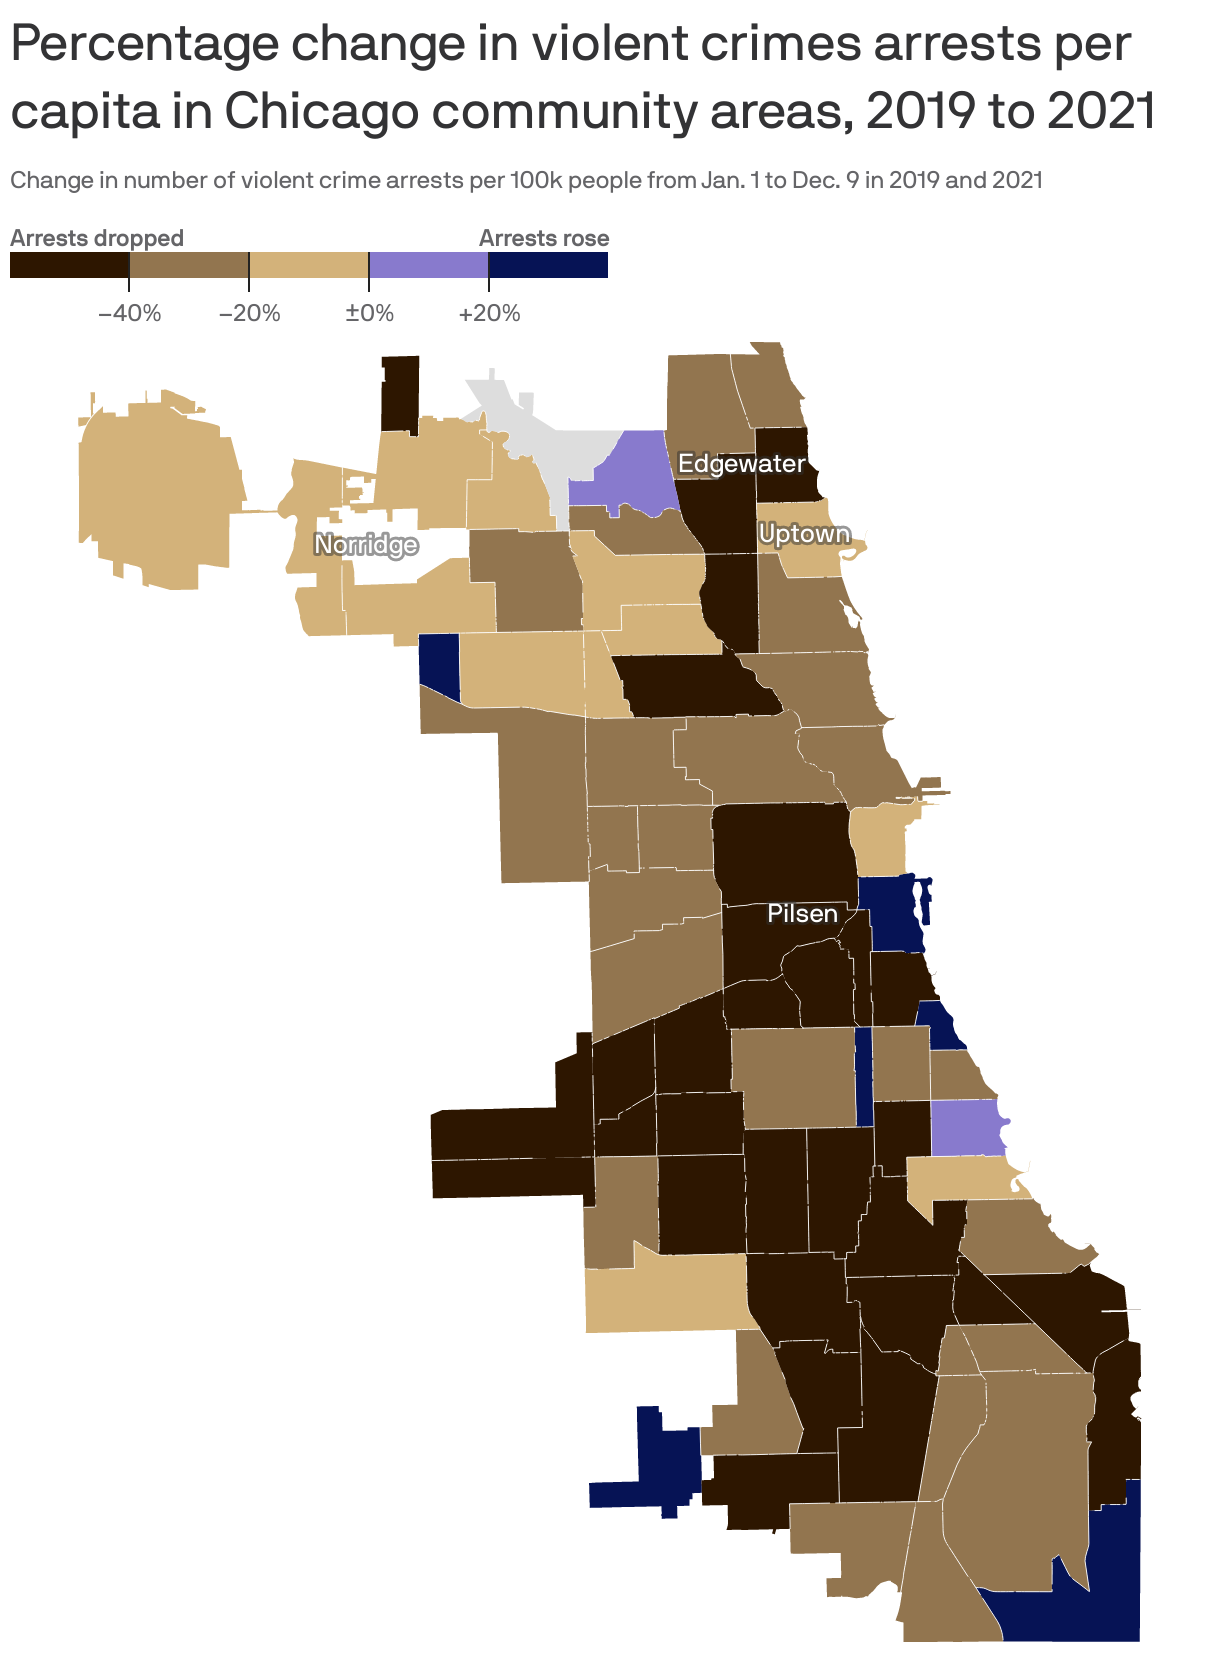 Percentage change in violent crimes arrests per capita in Chicago community areas, 2019 to 2021